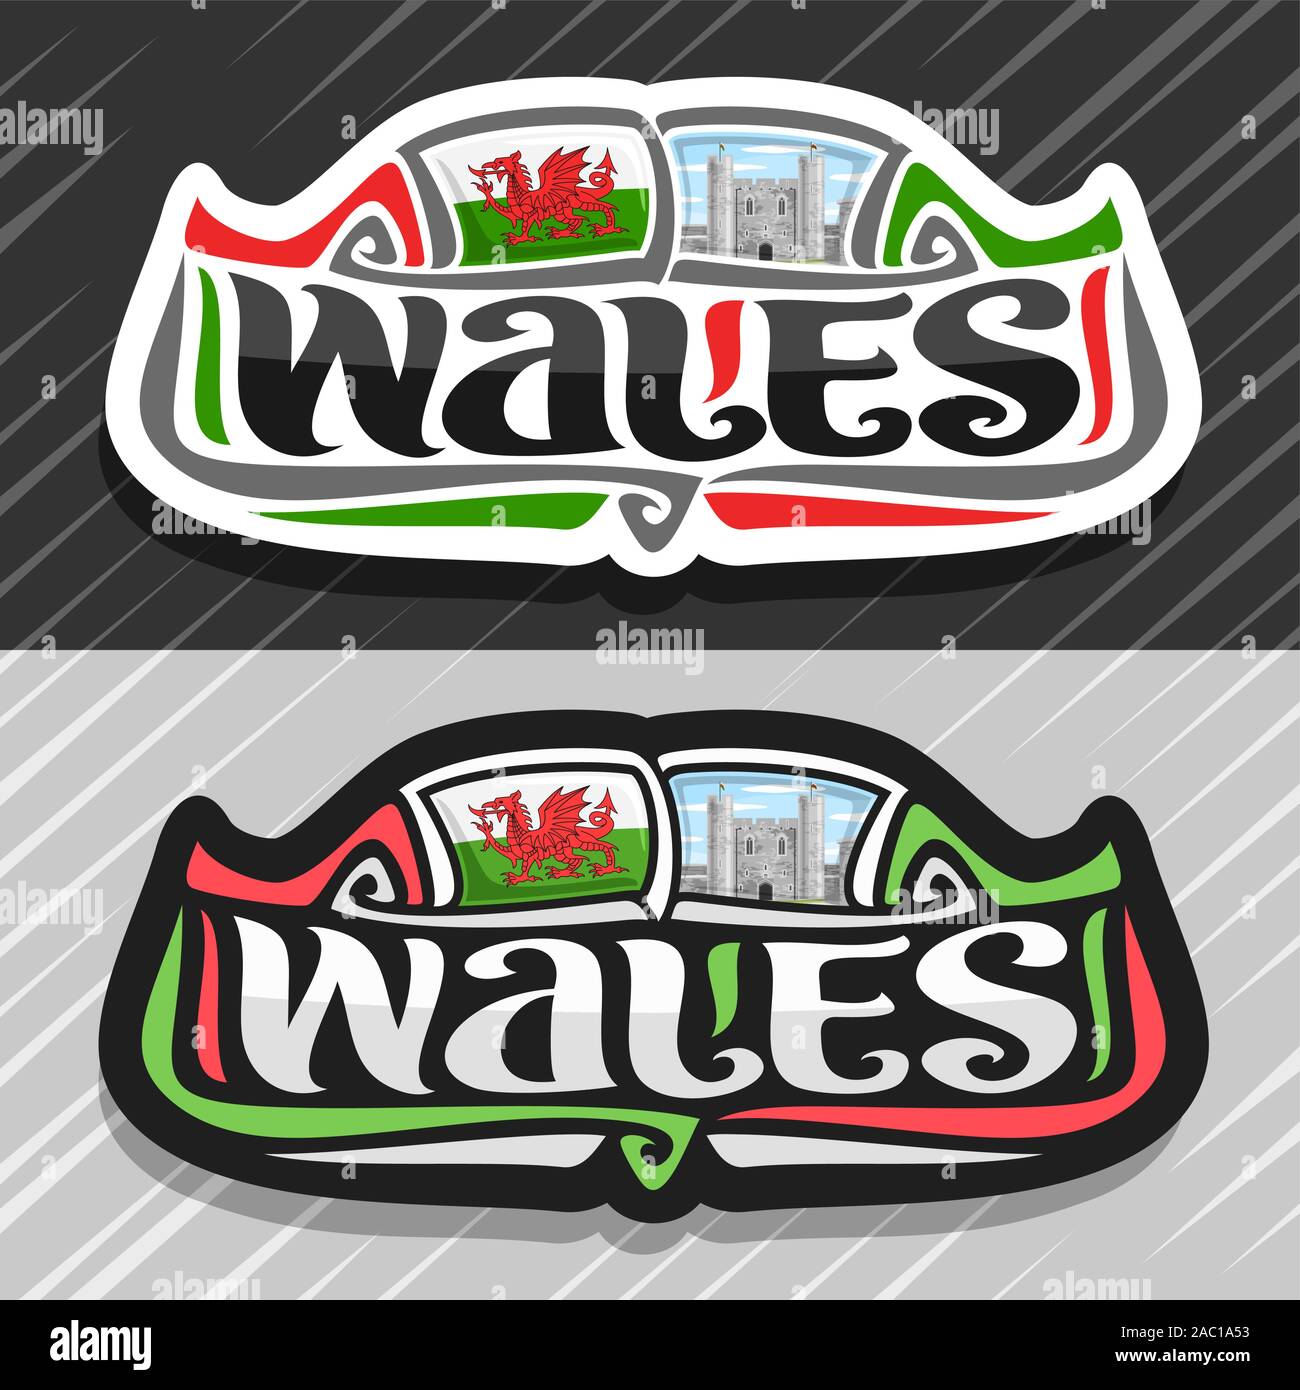 Vector logo for Wales, fridge magnet with welsh flag with red dragon, original brush typeface for word wales and national welsh symbol - Caerphilly ca Stock Vector